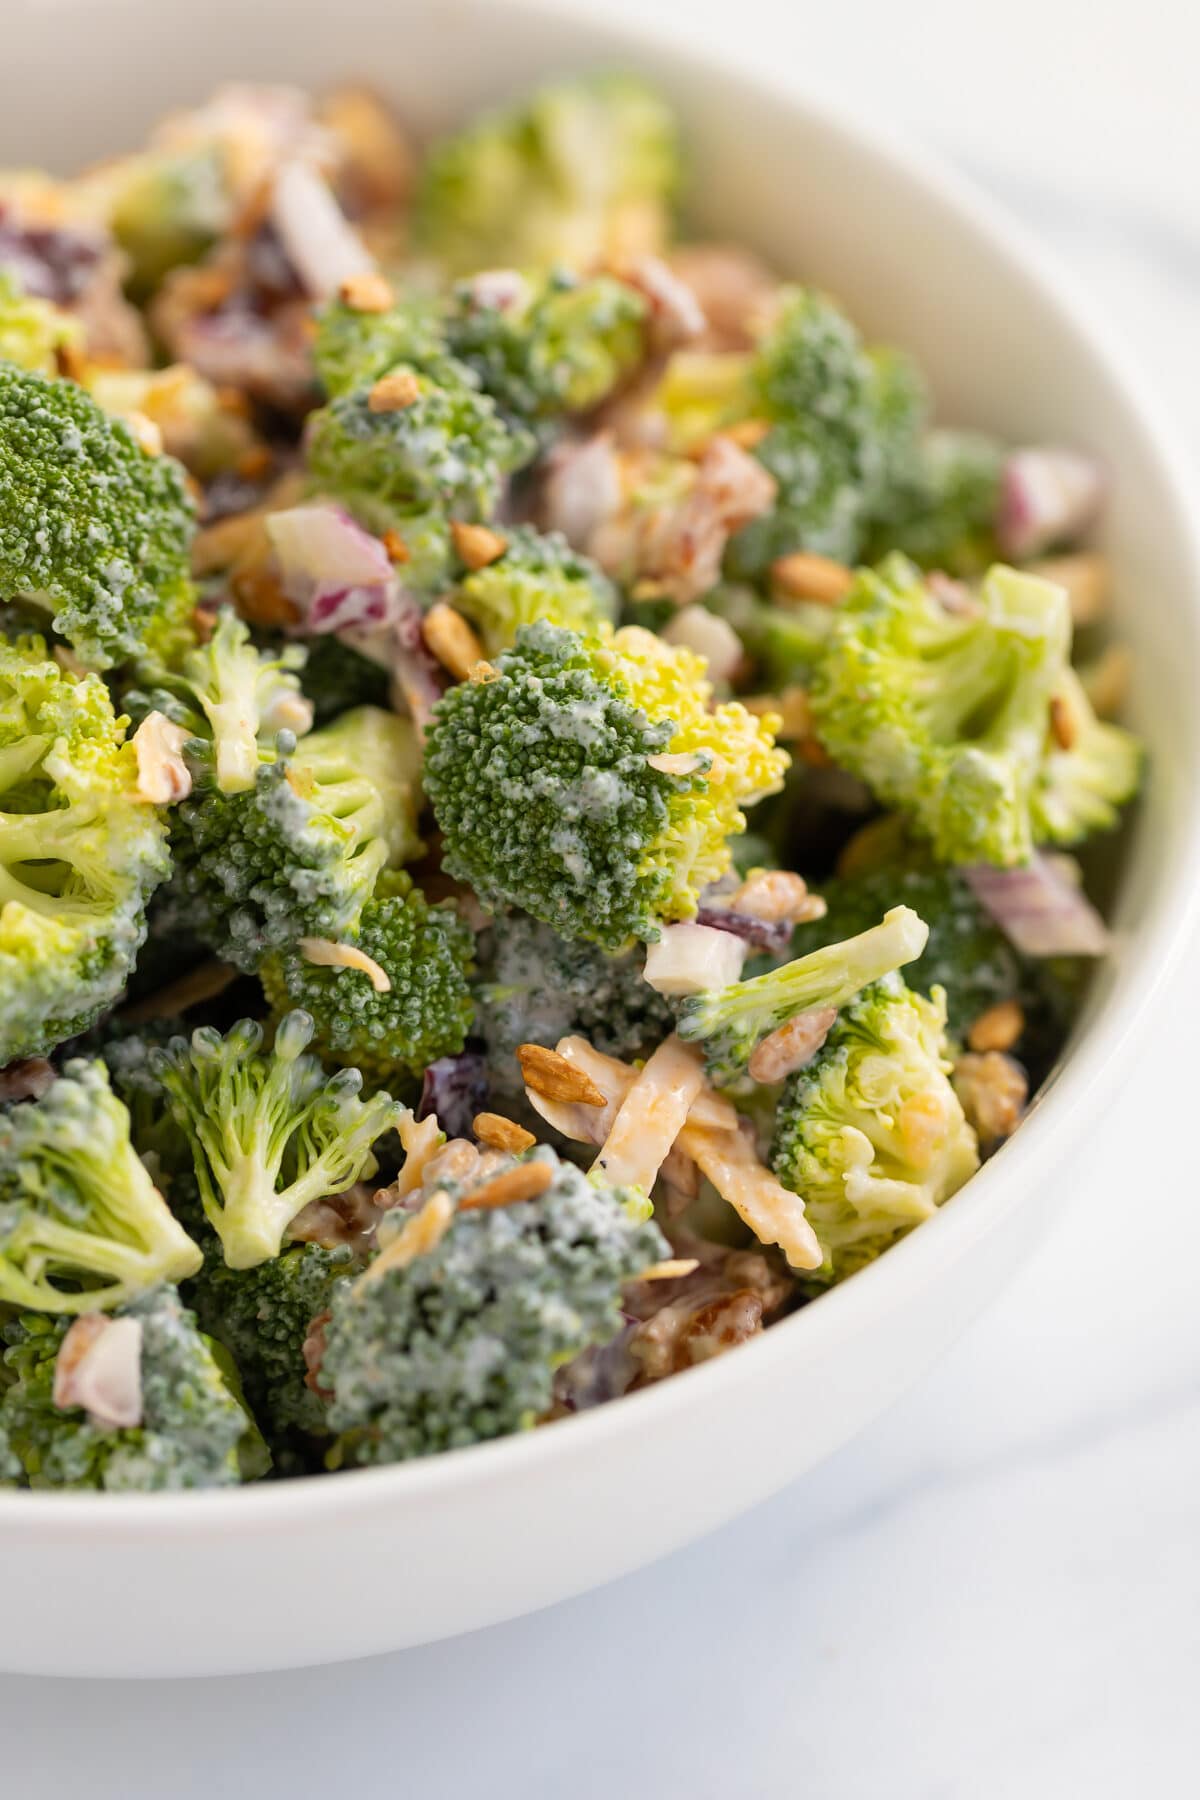 healthy broccoli salad with a tangy no-mayo dressing